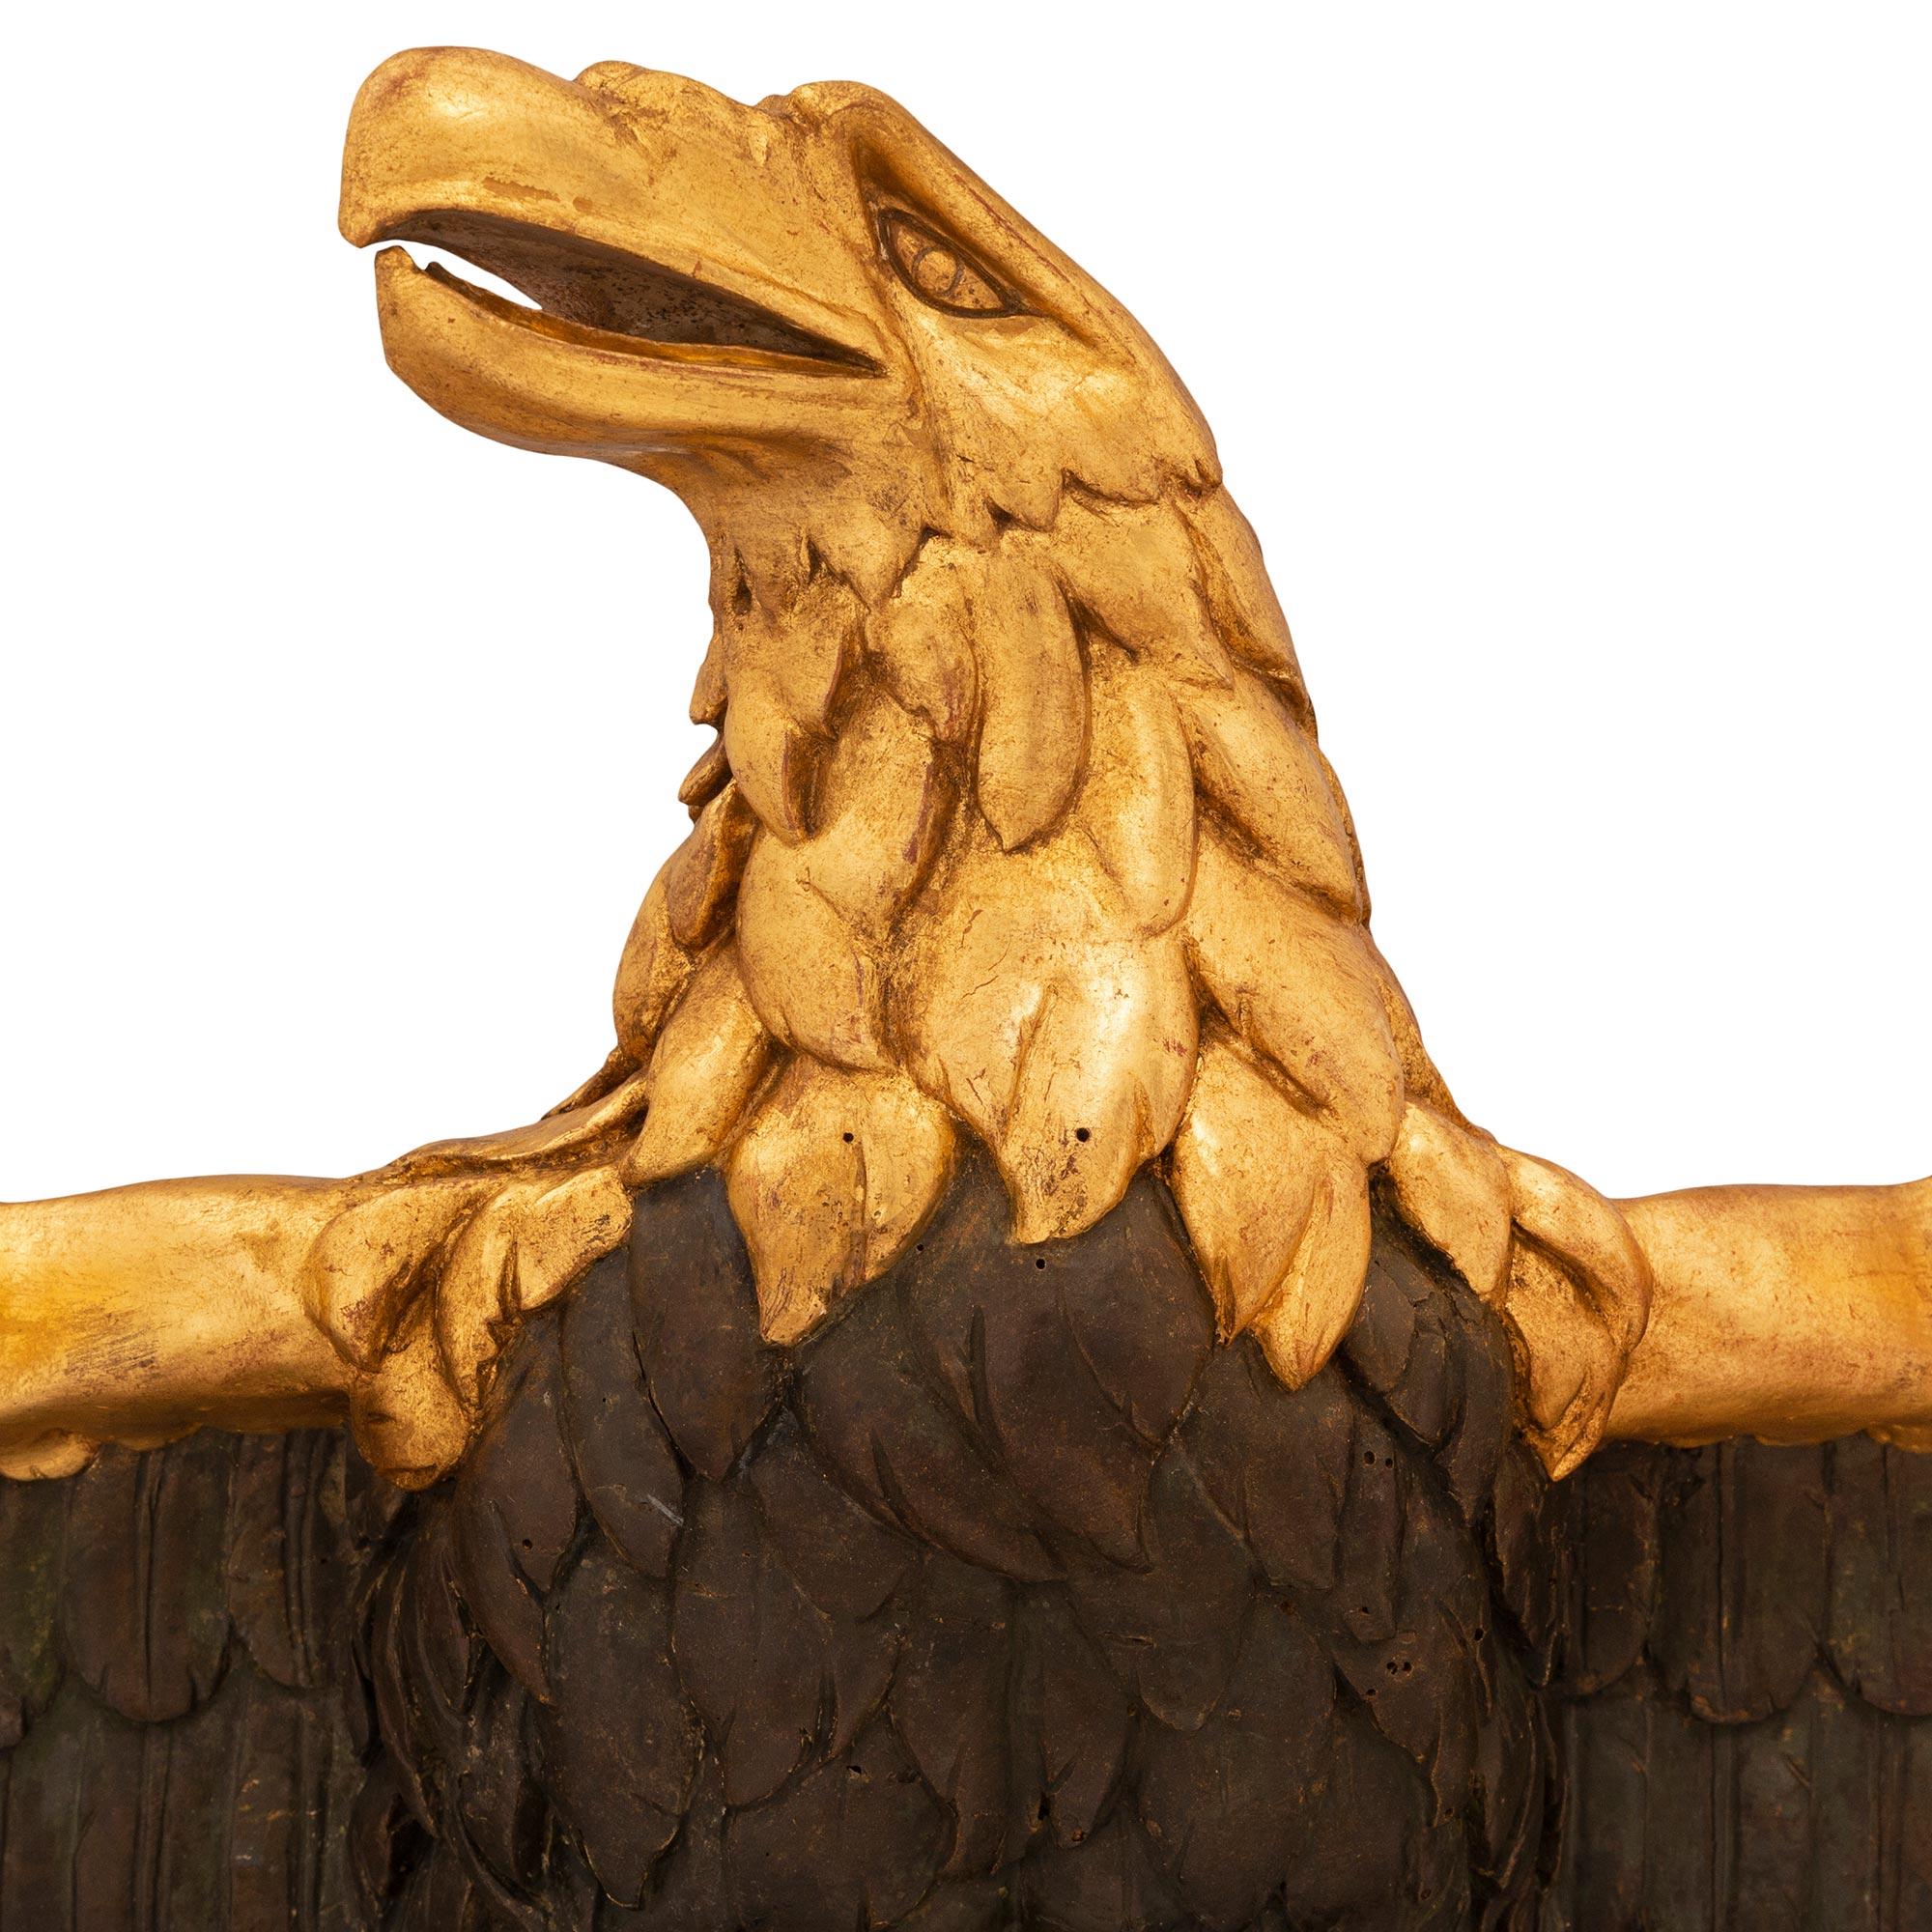 An impressive and extremely decorative French early 19th century 1st Empire period giltwood and polychrome eagle wall decor. The unique wall decor depicts and a striking wonderfully executed open winged eagle with exceptional attention to detail and